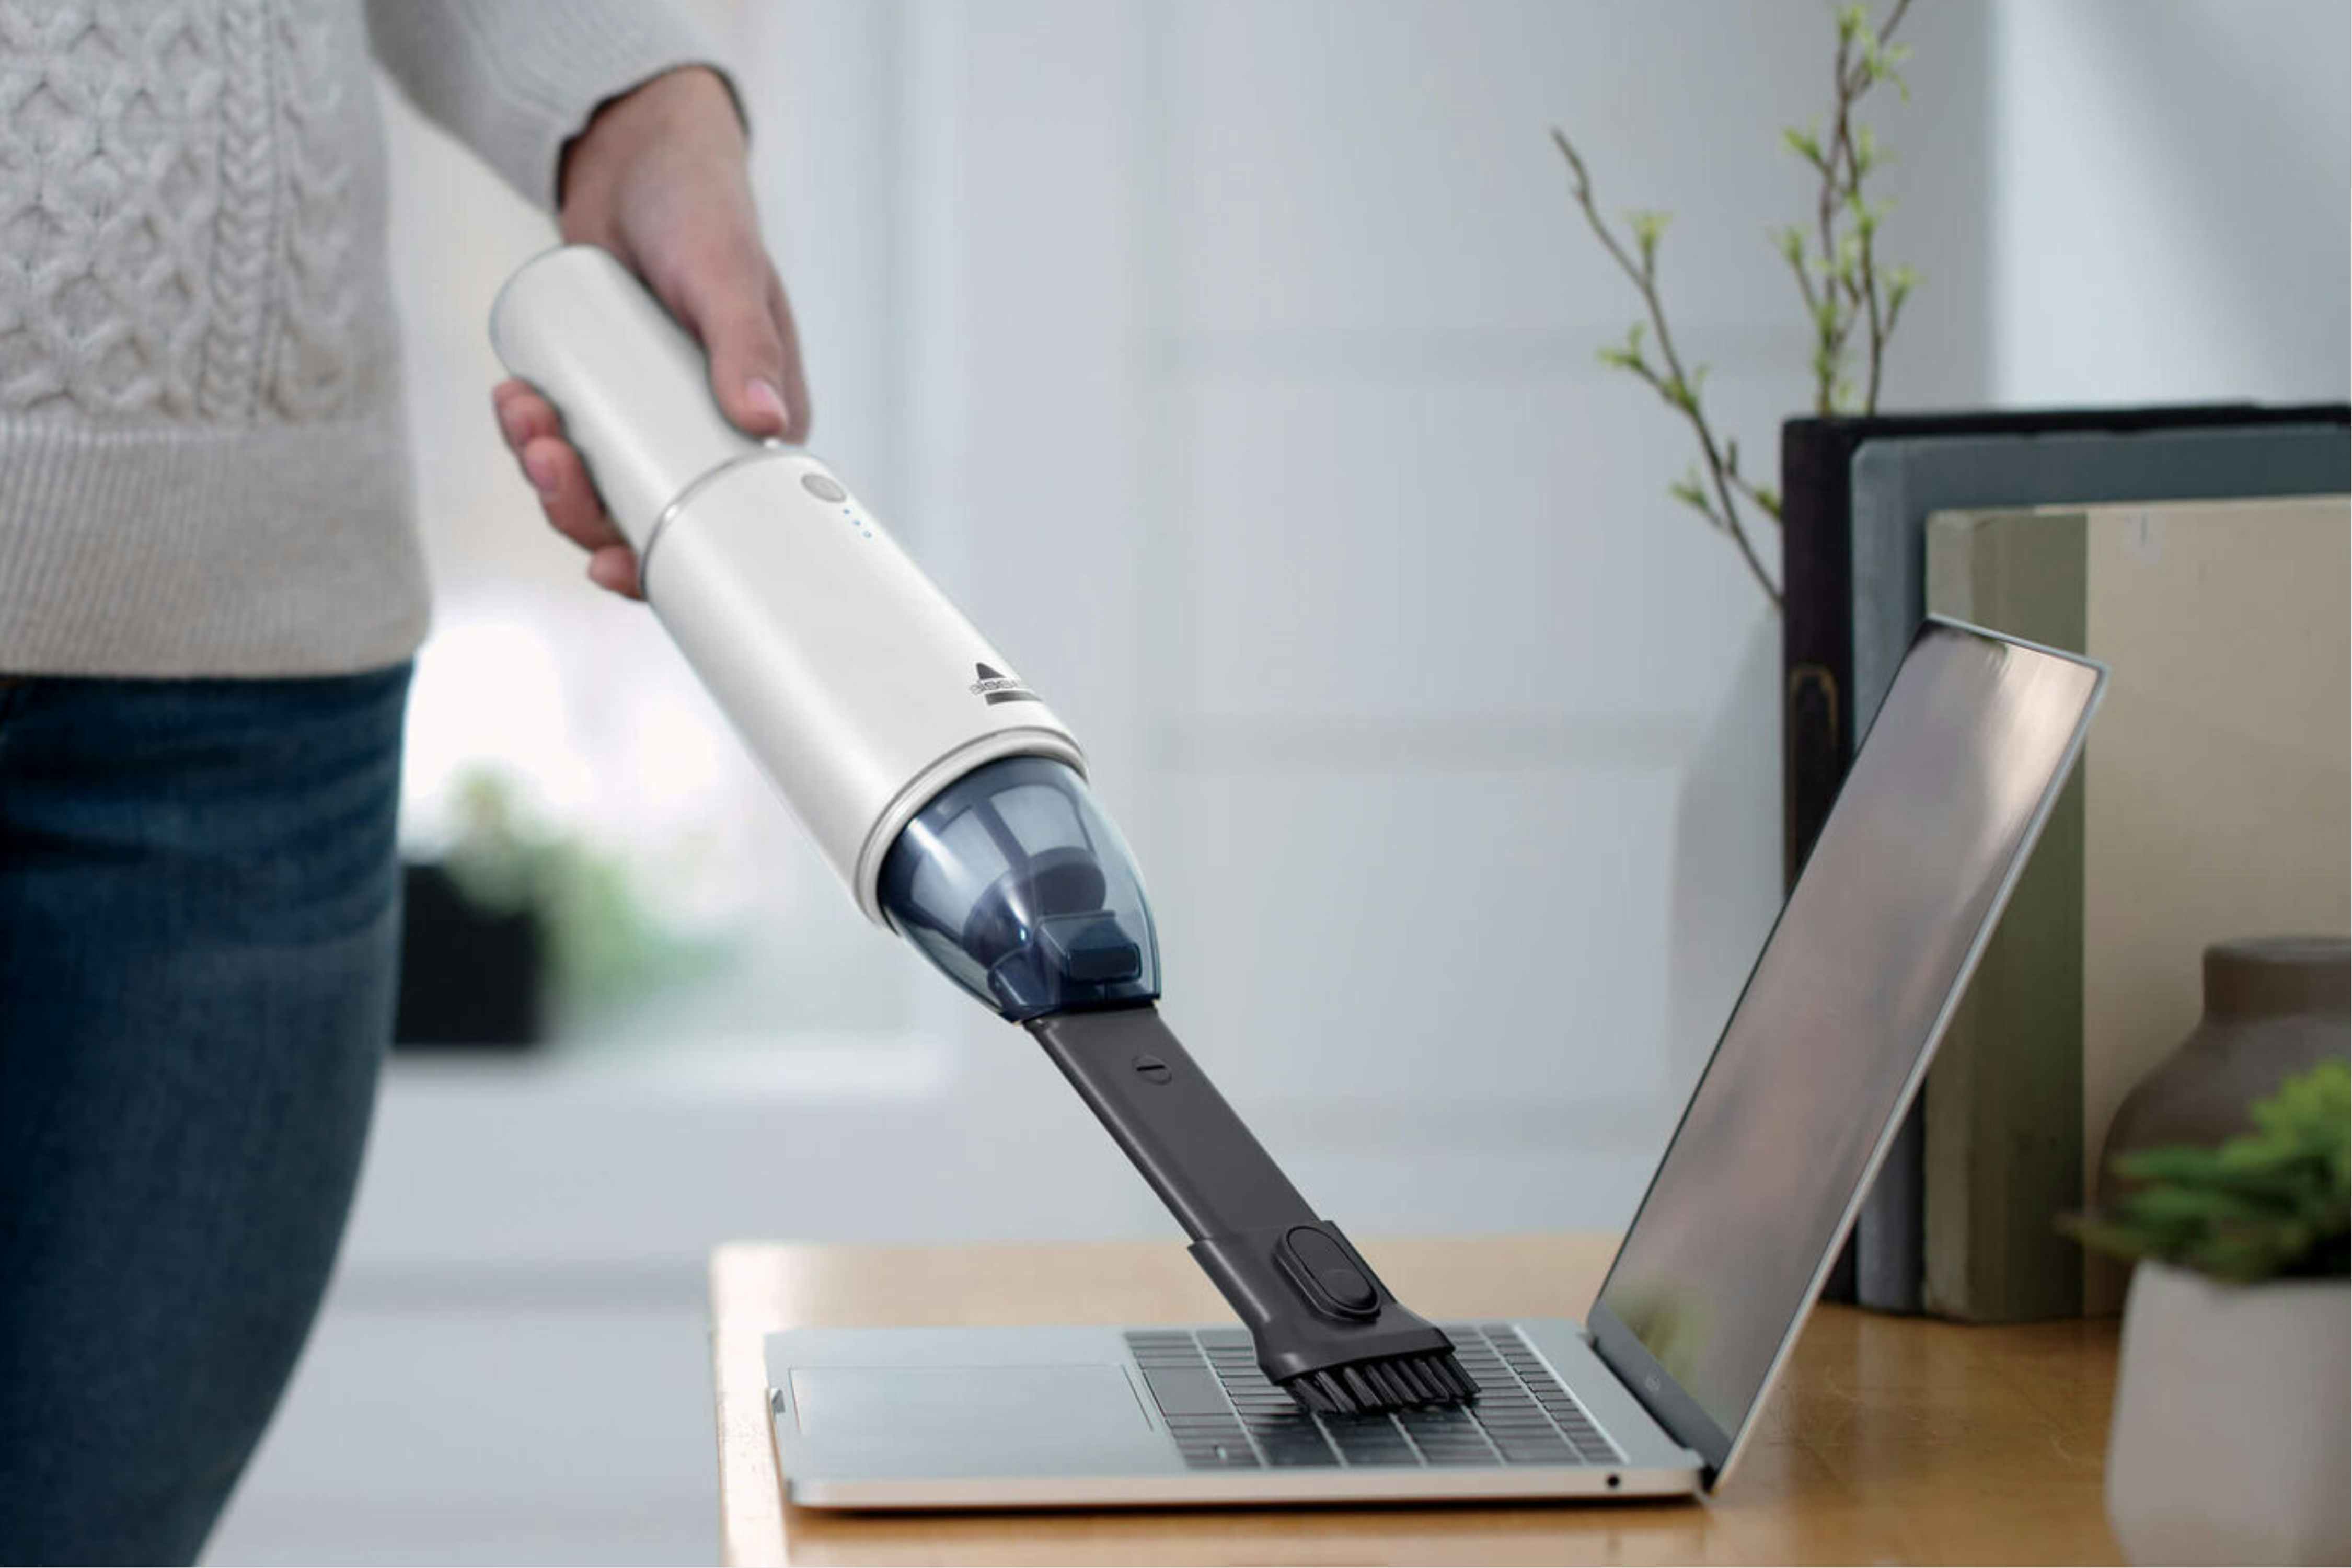 Bissell TurboSlim Hand Vacuum, Only $9.99 Shipped at eBay